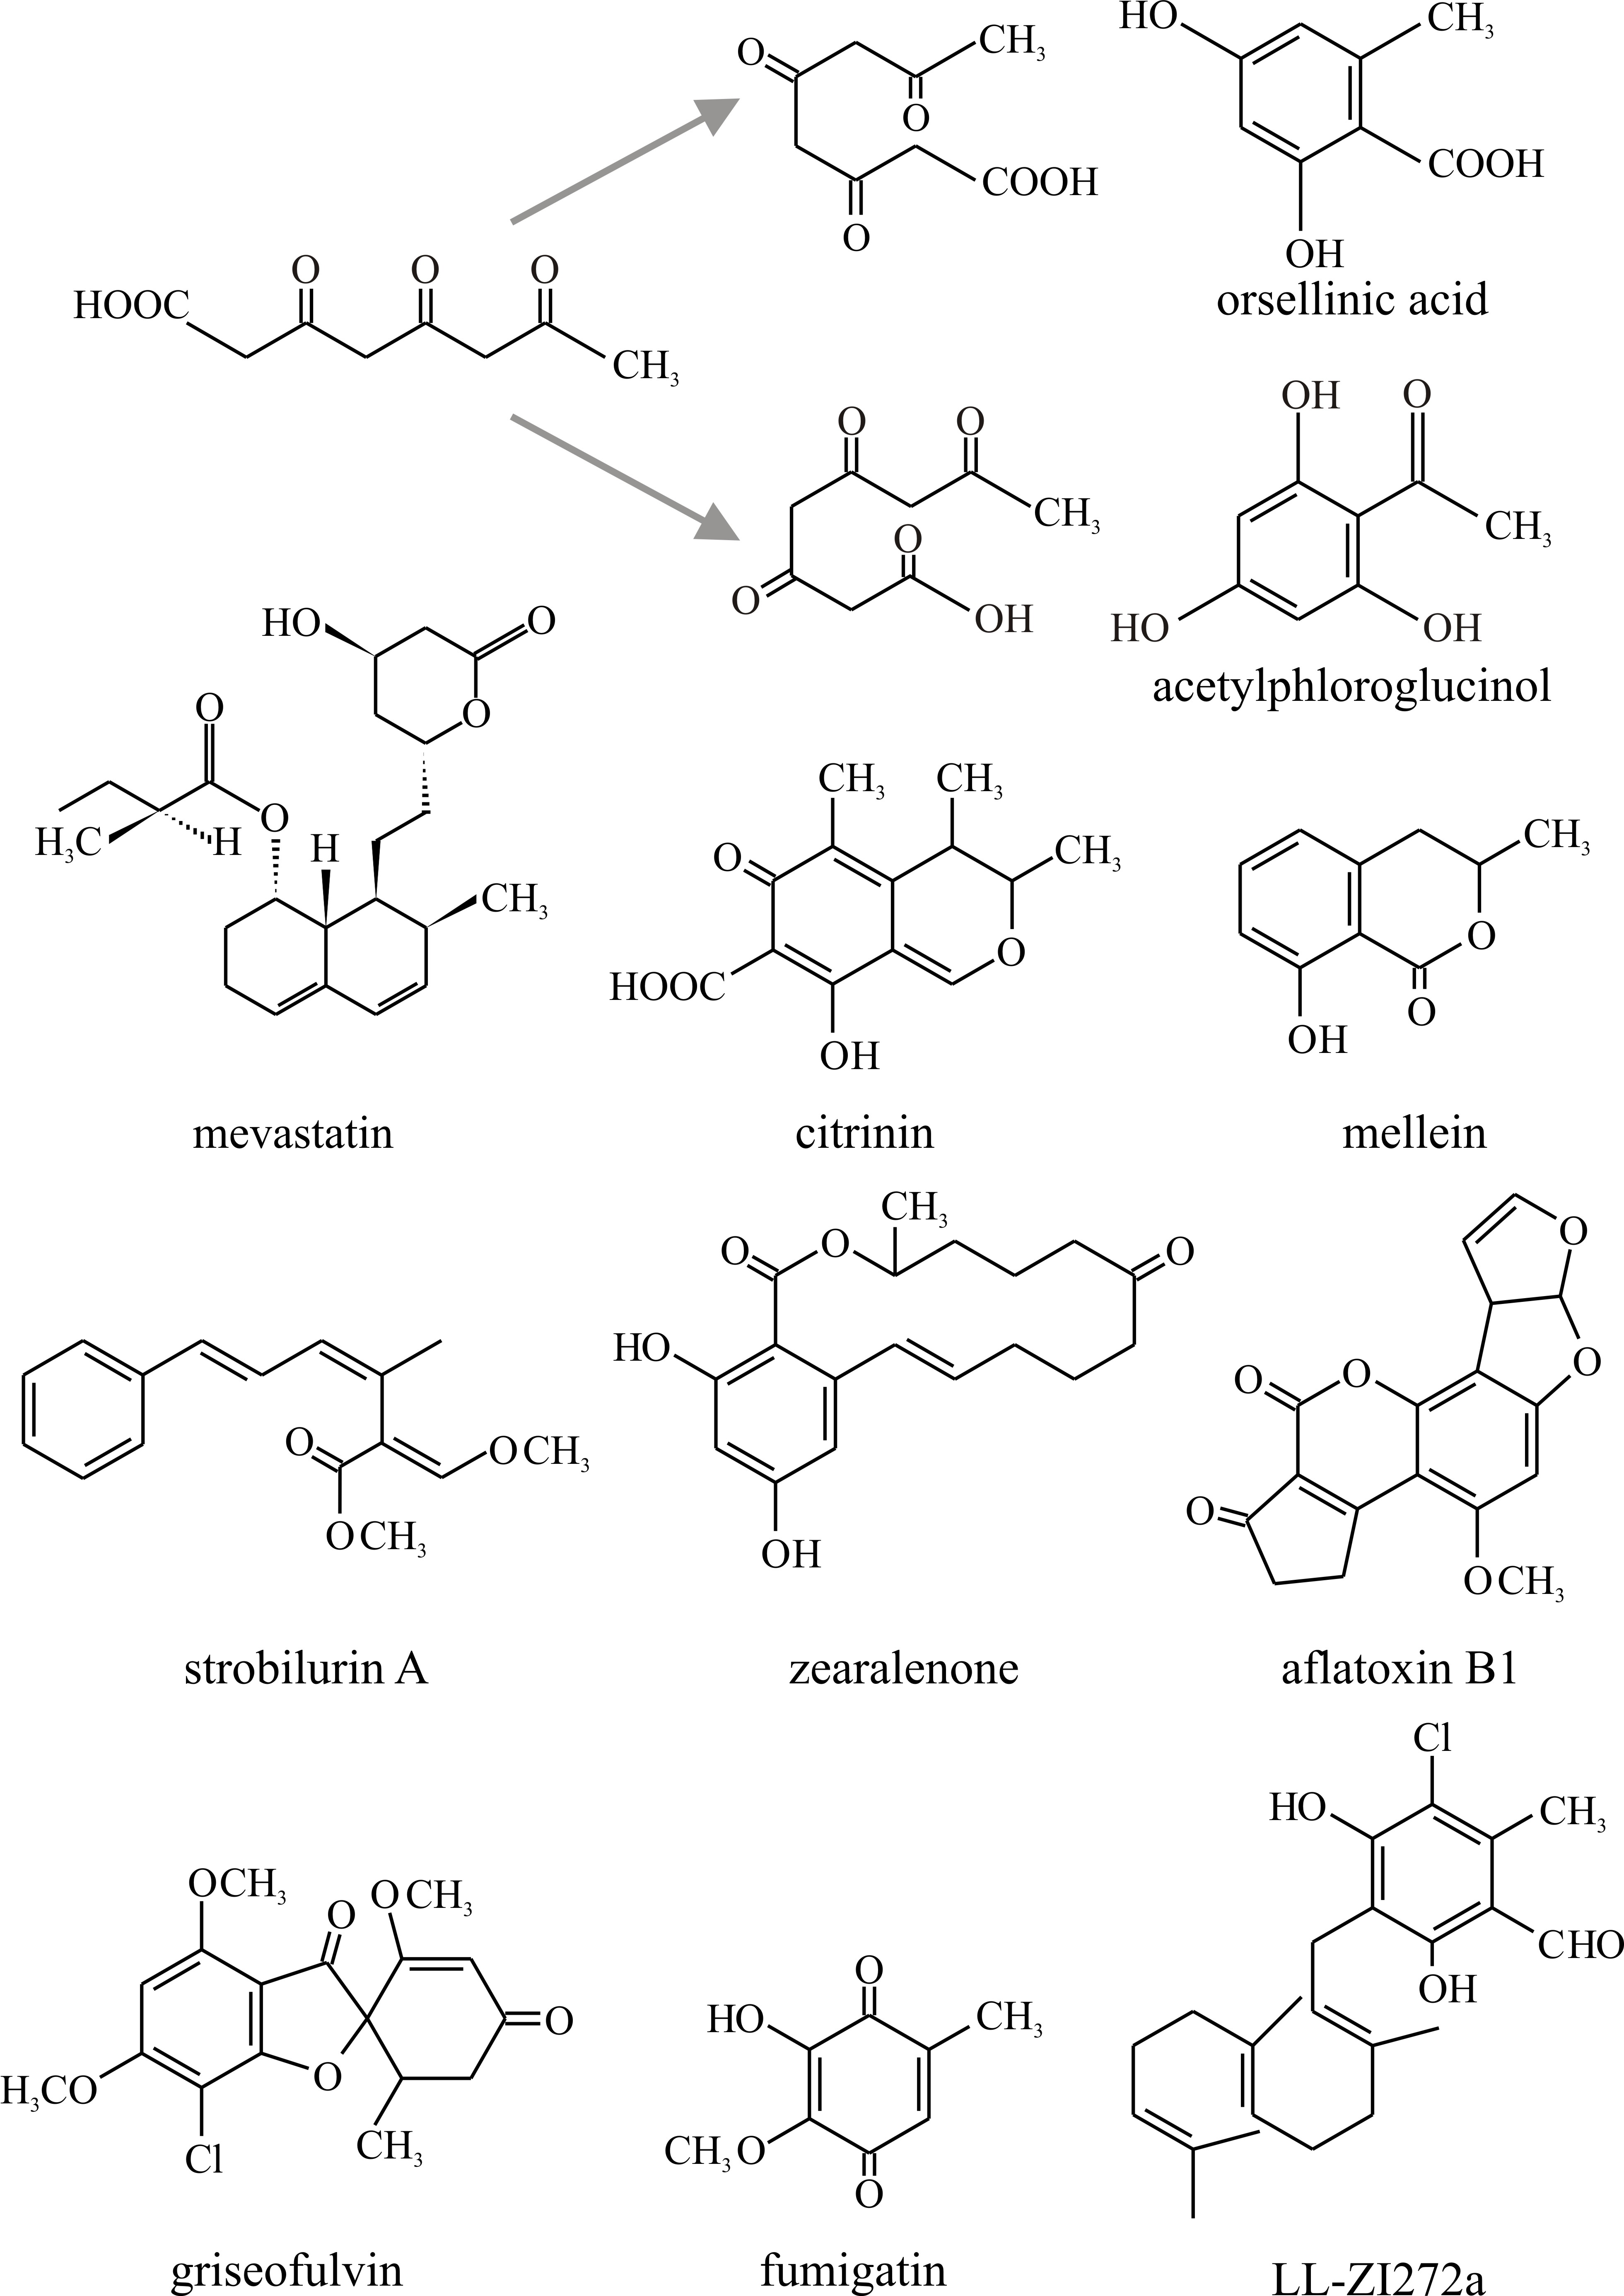 Polyketide chains can fold in a variety of ways and internal aldol condensations form closed aromatic rings